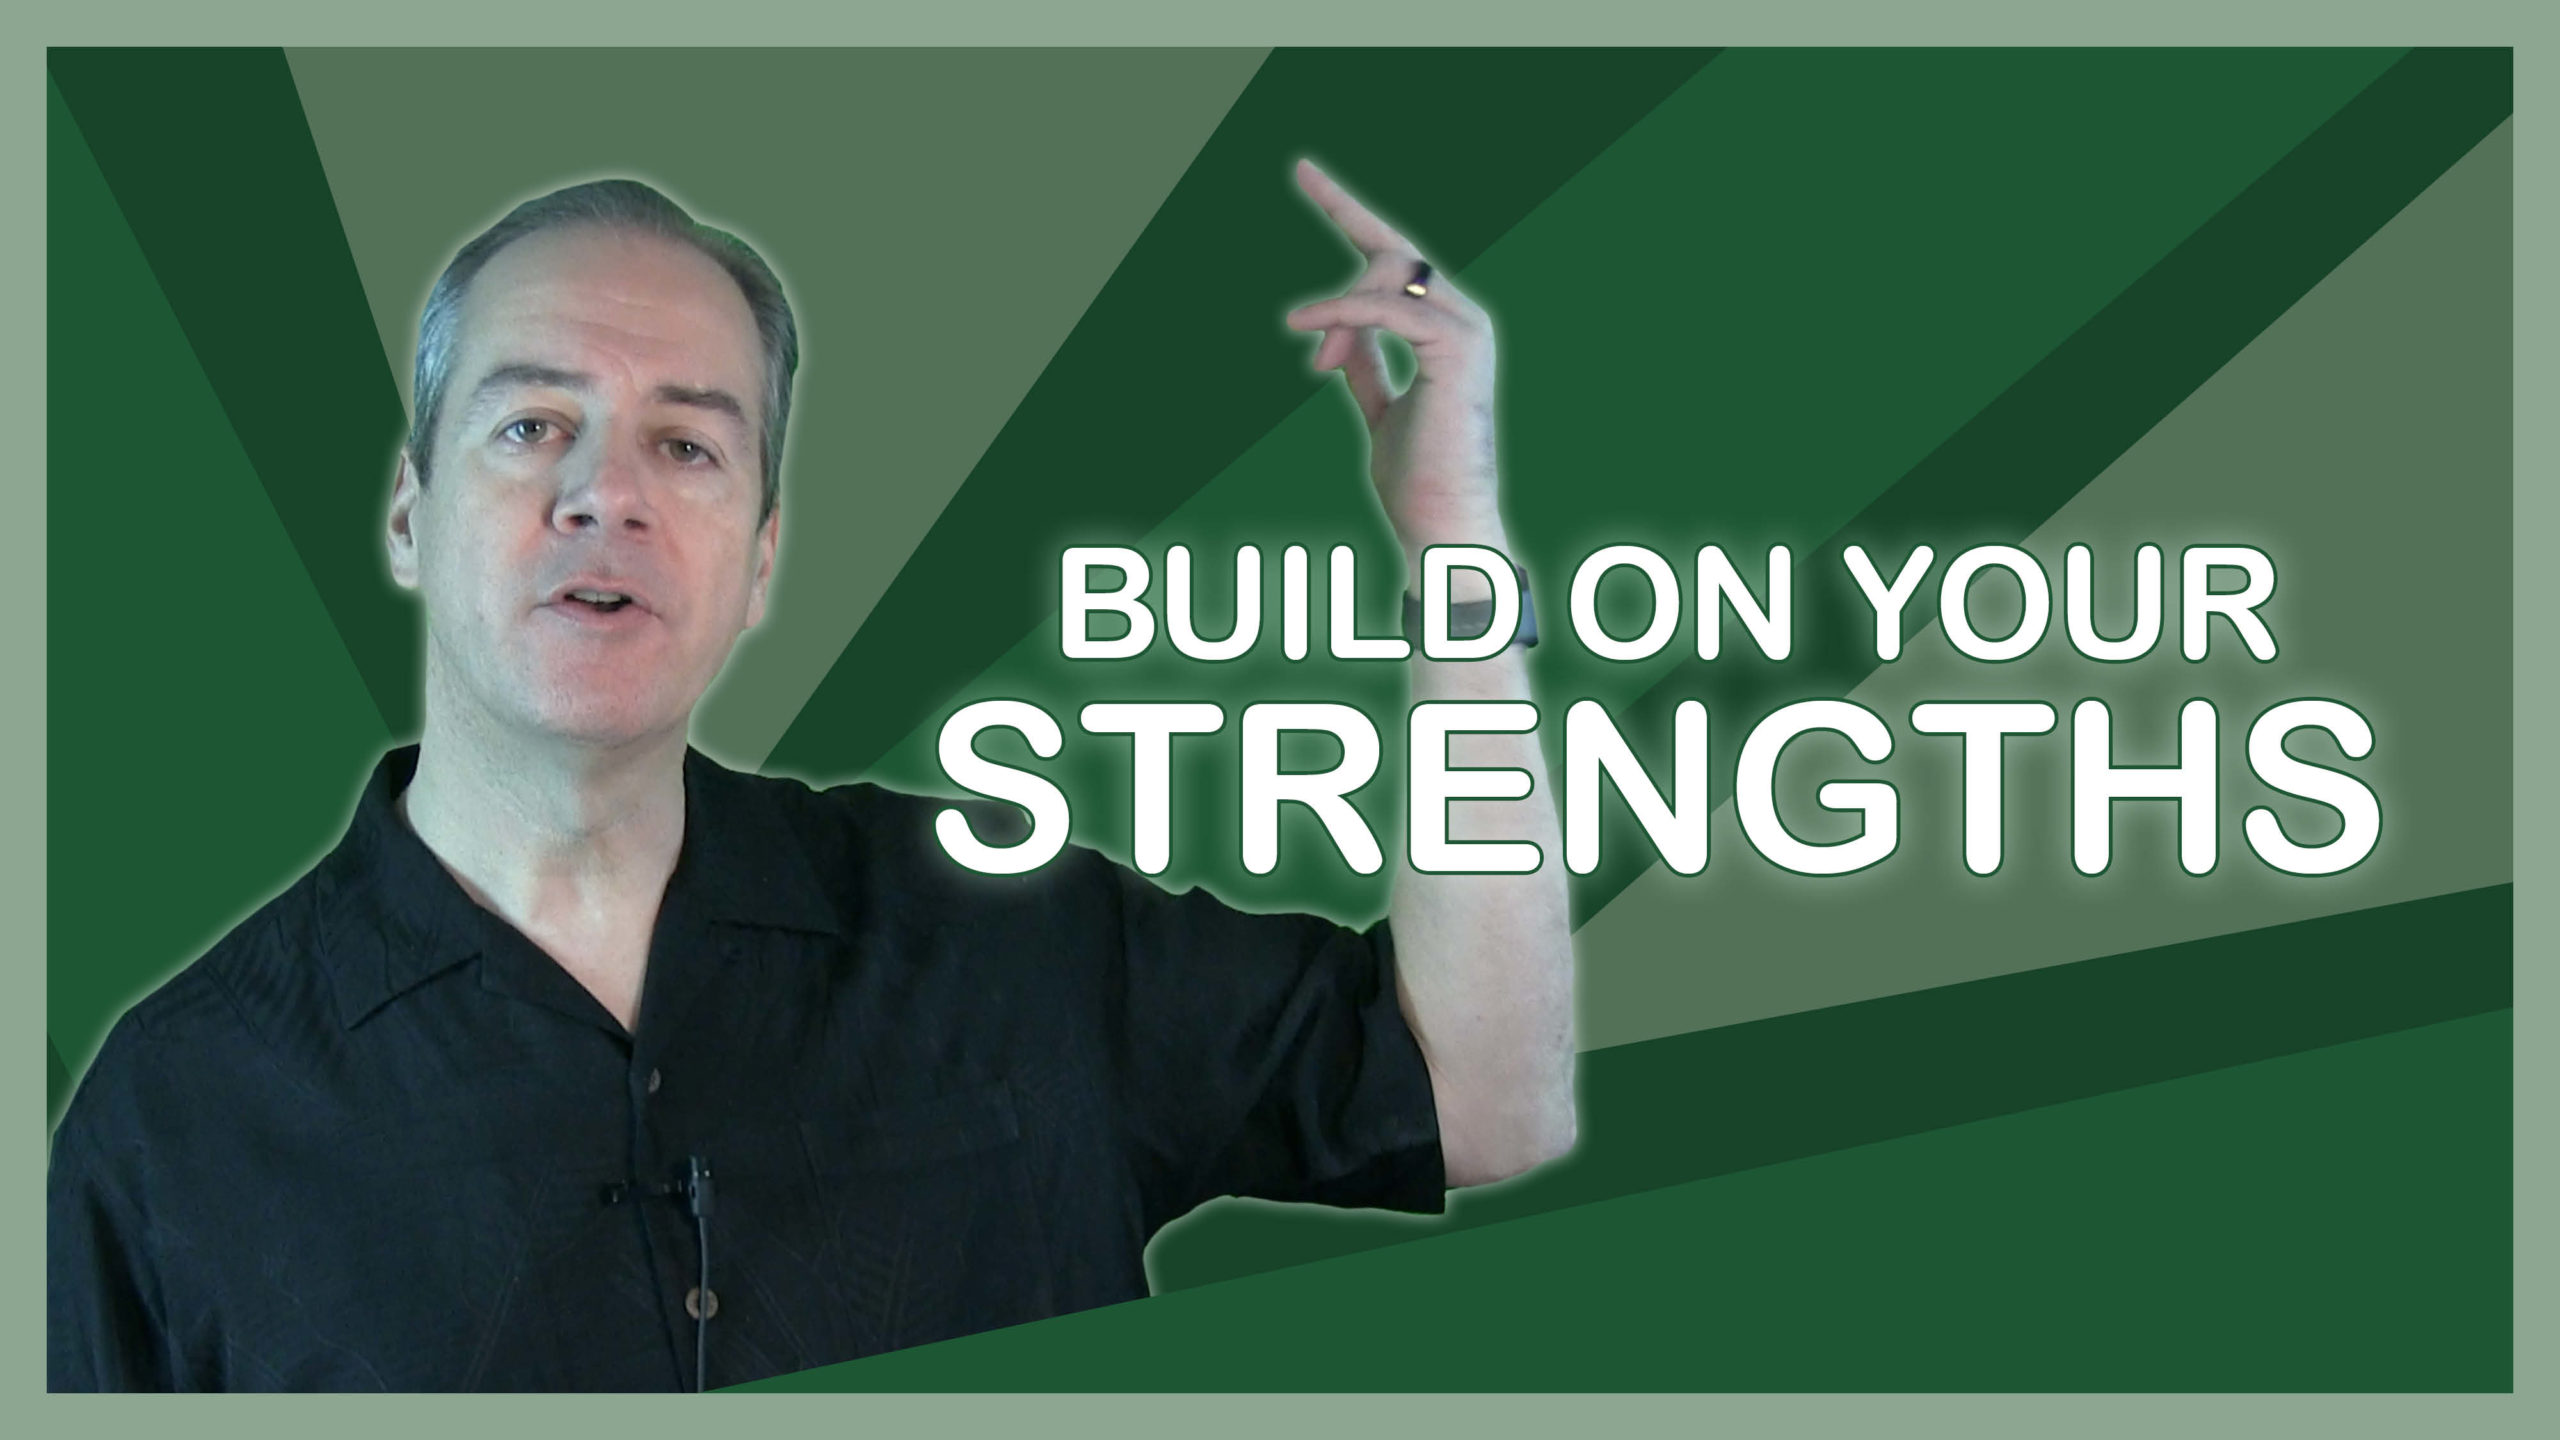 Be Open & Build on your Strengths